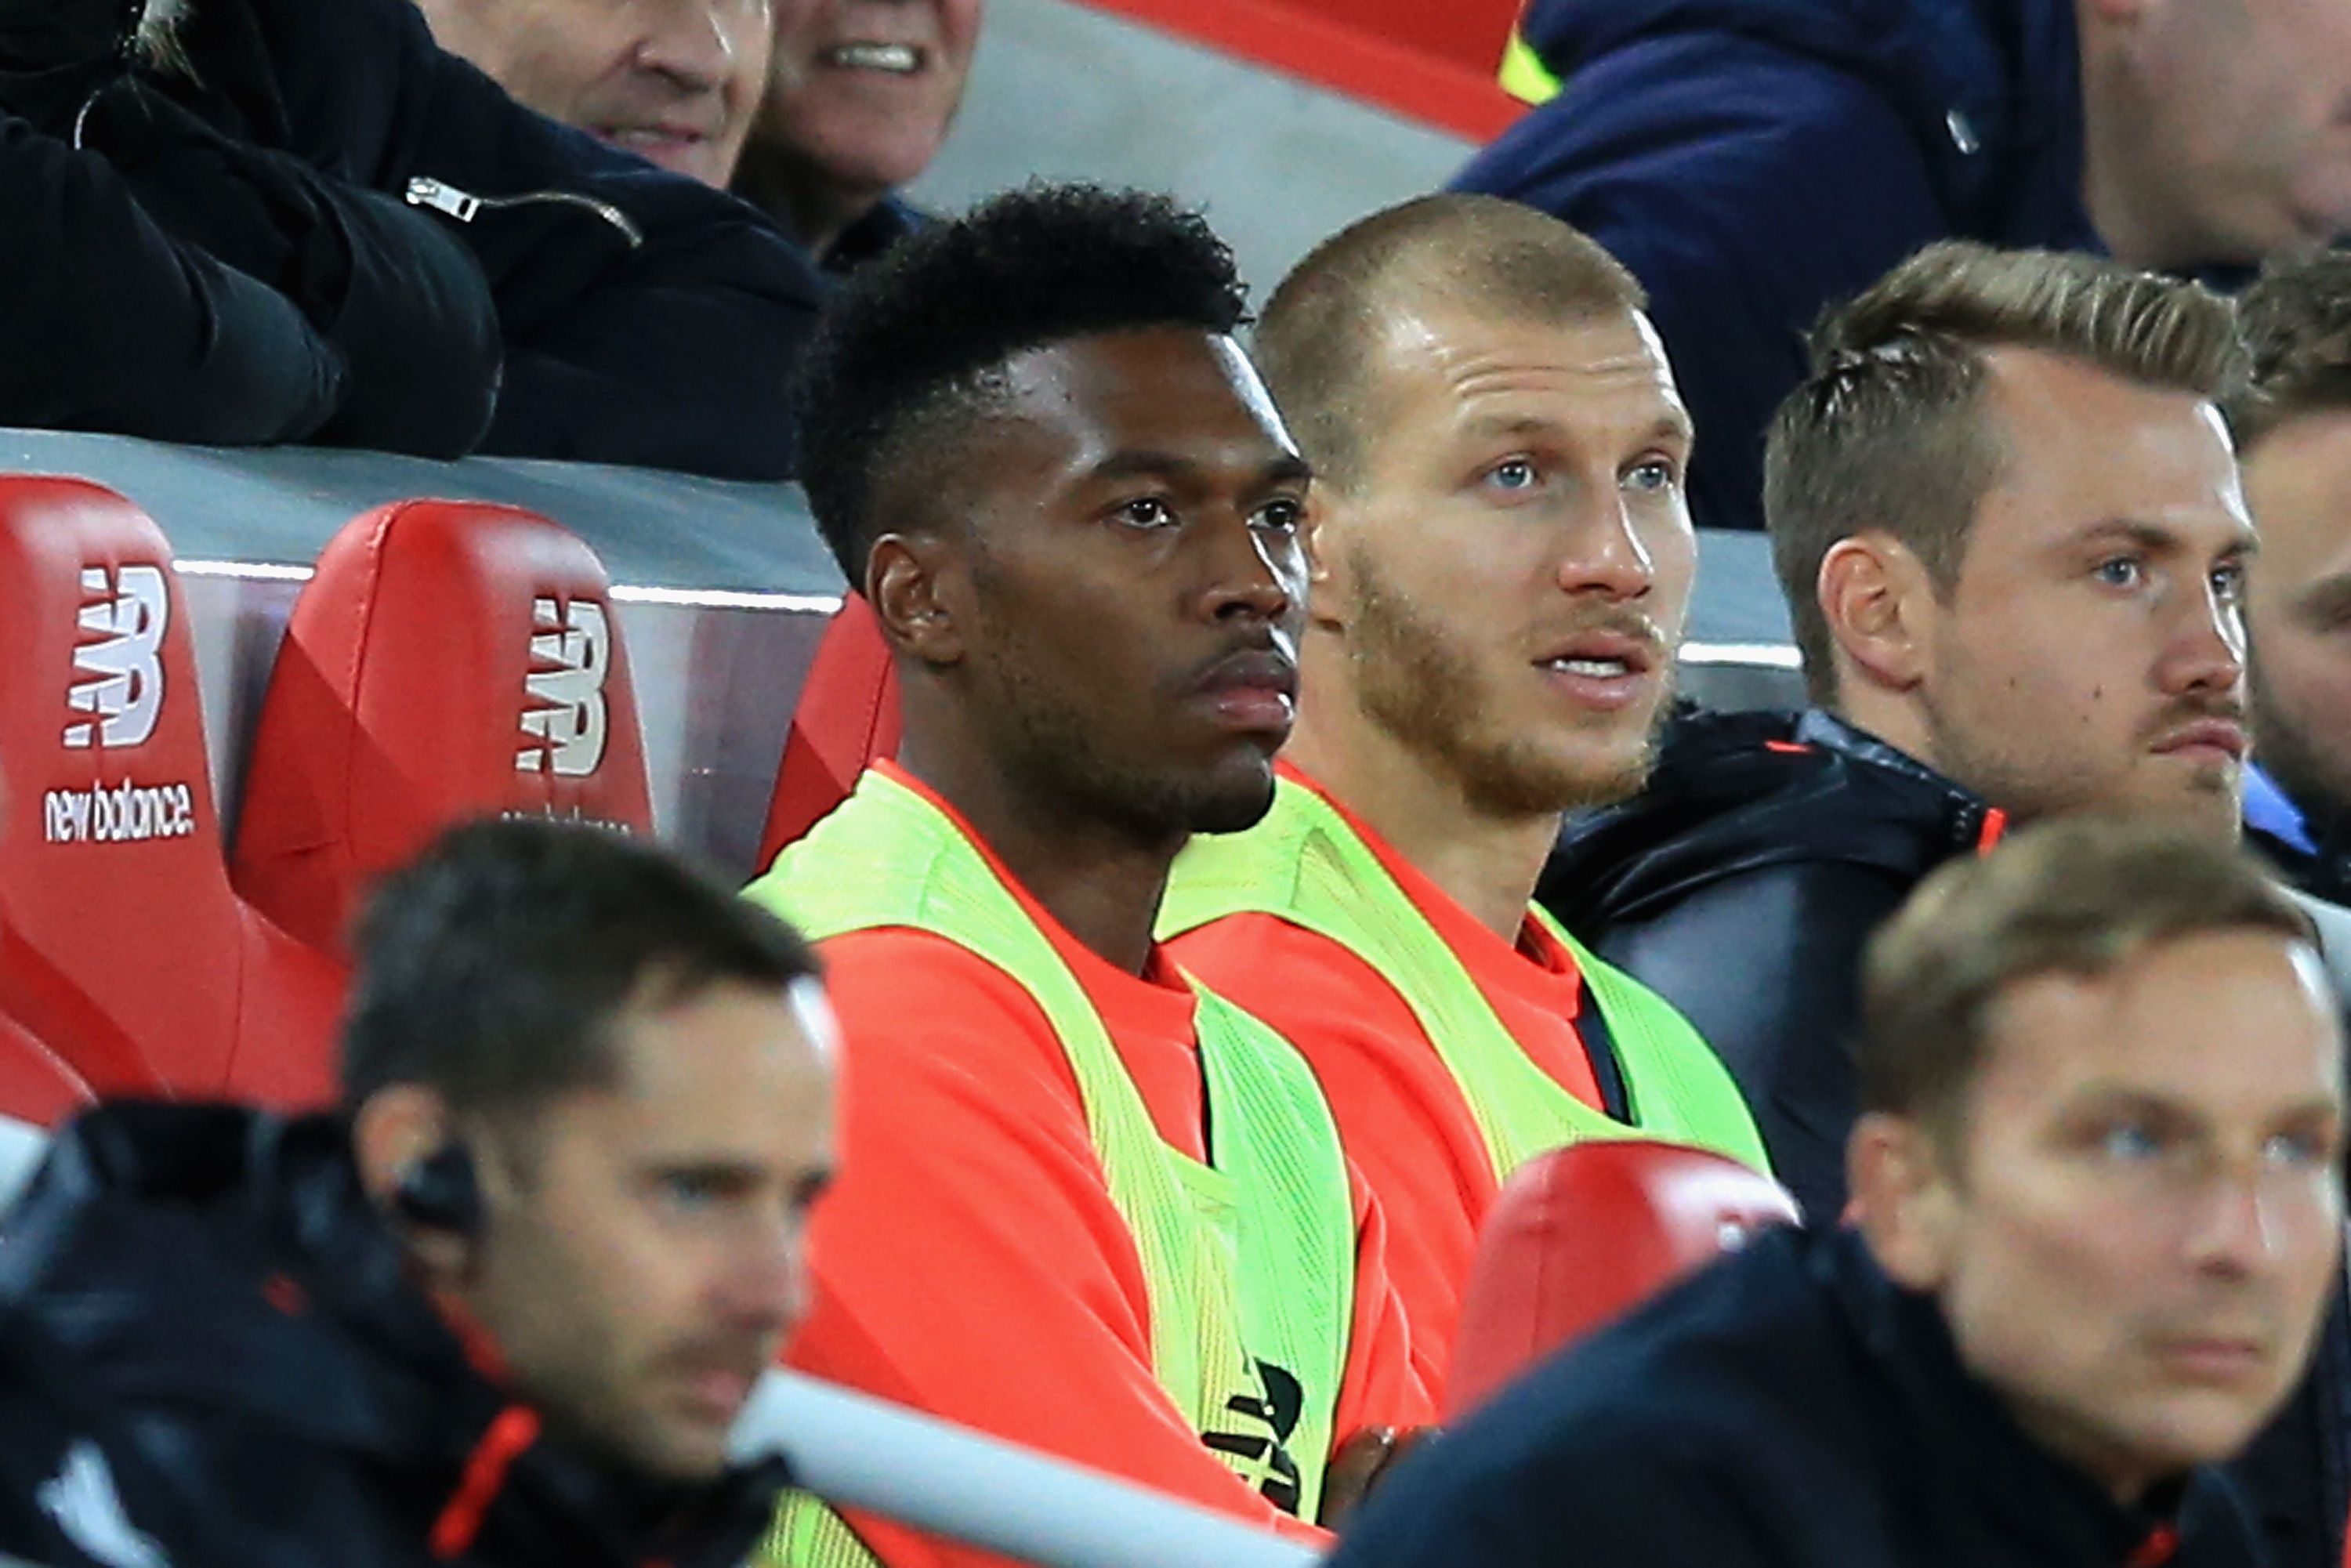 LIVERPOOL, ENGLAND - OCTOBER 22:  Substitute Daniel Sturridge of Liverpool looks on from the bench during the Premier League match between Liverpool and West Bromwich Albion at Anfield on October 22, 2016 in Liverpool, England.  (Photo by Jan Kruger/Getty Images)